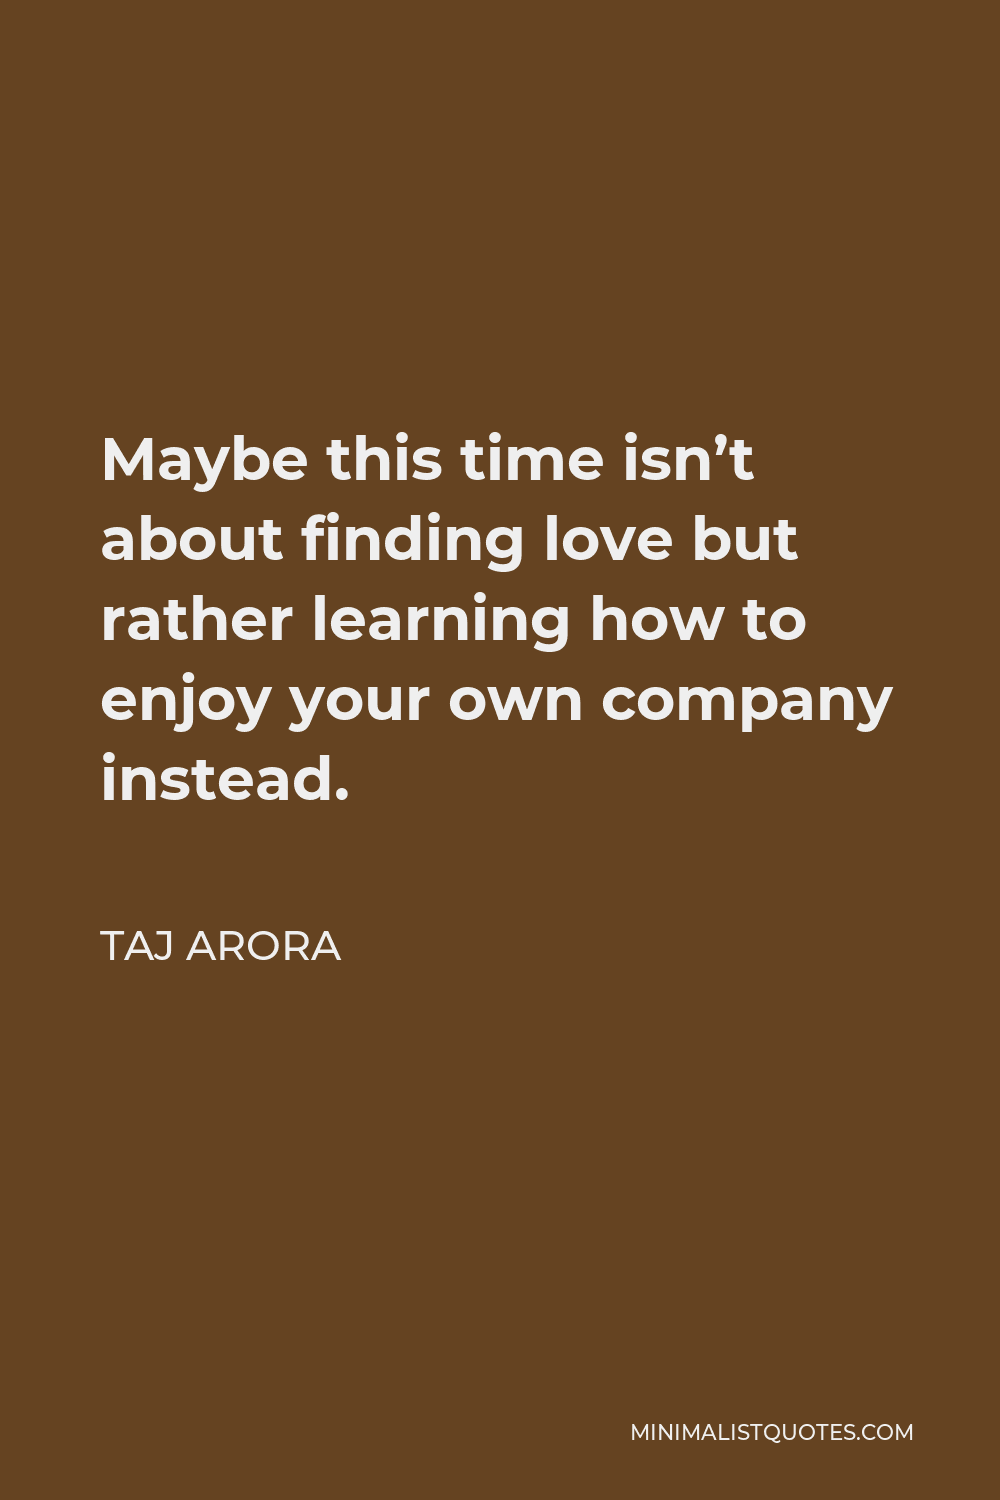 Taj Arora Quote - Maybe this time isn’t about finding love but rather learning how to enjoy your own company instead.